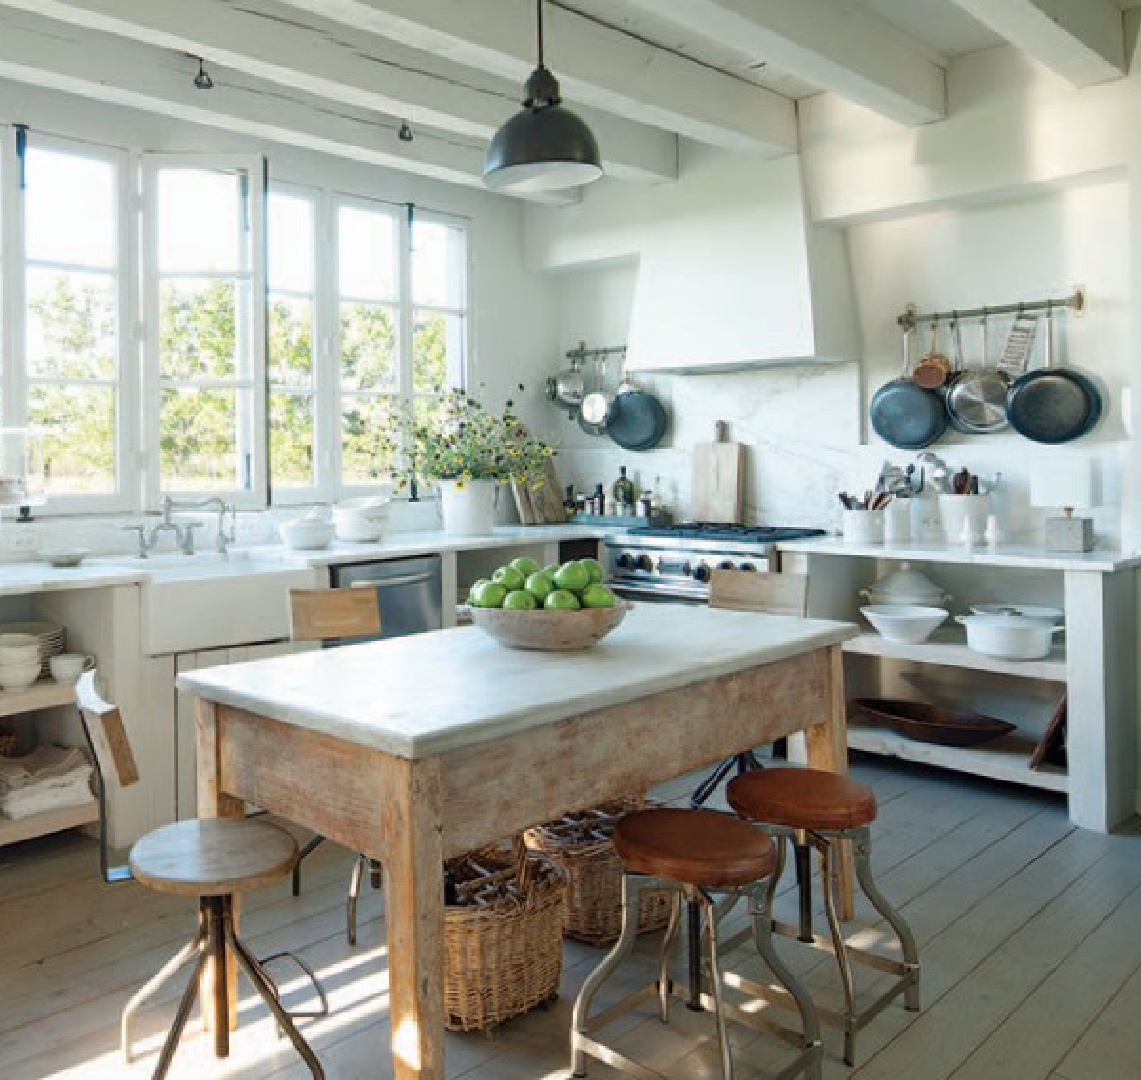 Modern French kitchen designed by Eleanor Cummings (Kirby Mears, architect) with rustic work table, industrial elements, and lower cabinets without doors - photo by Tim Street Porter. #modernfrench #frenchkitchen